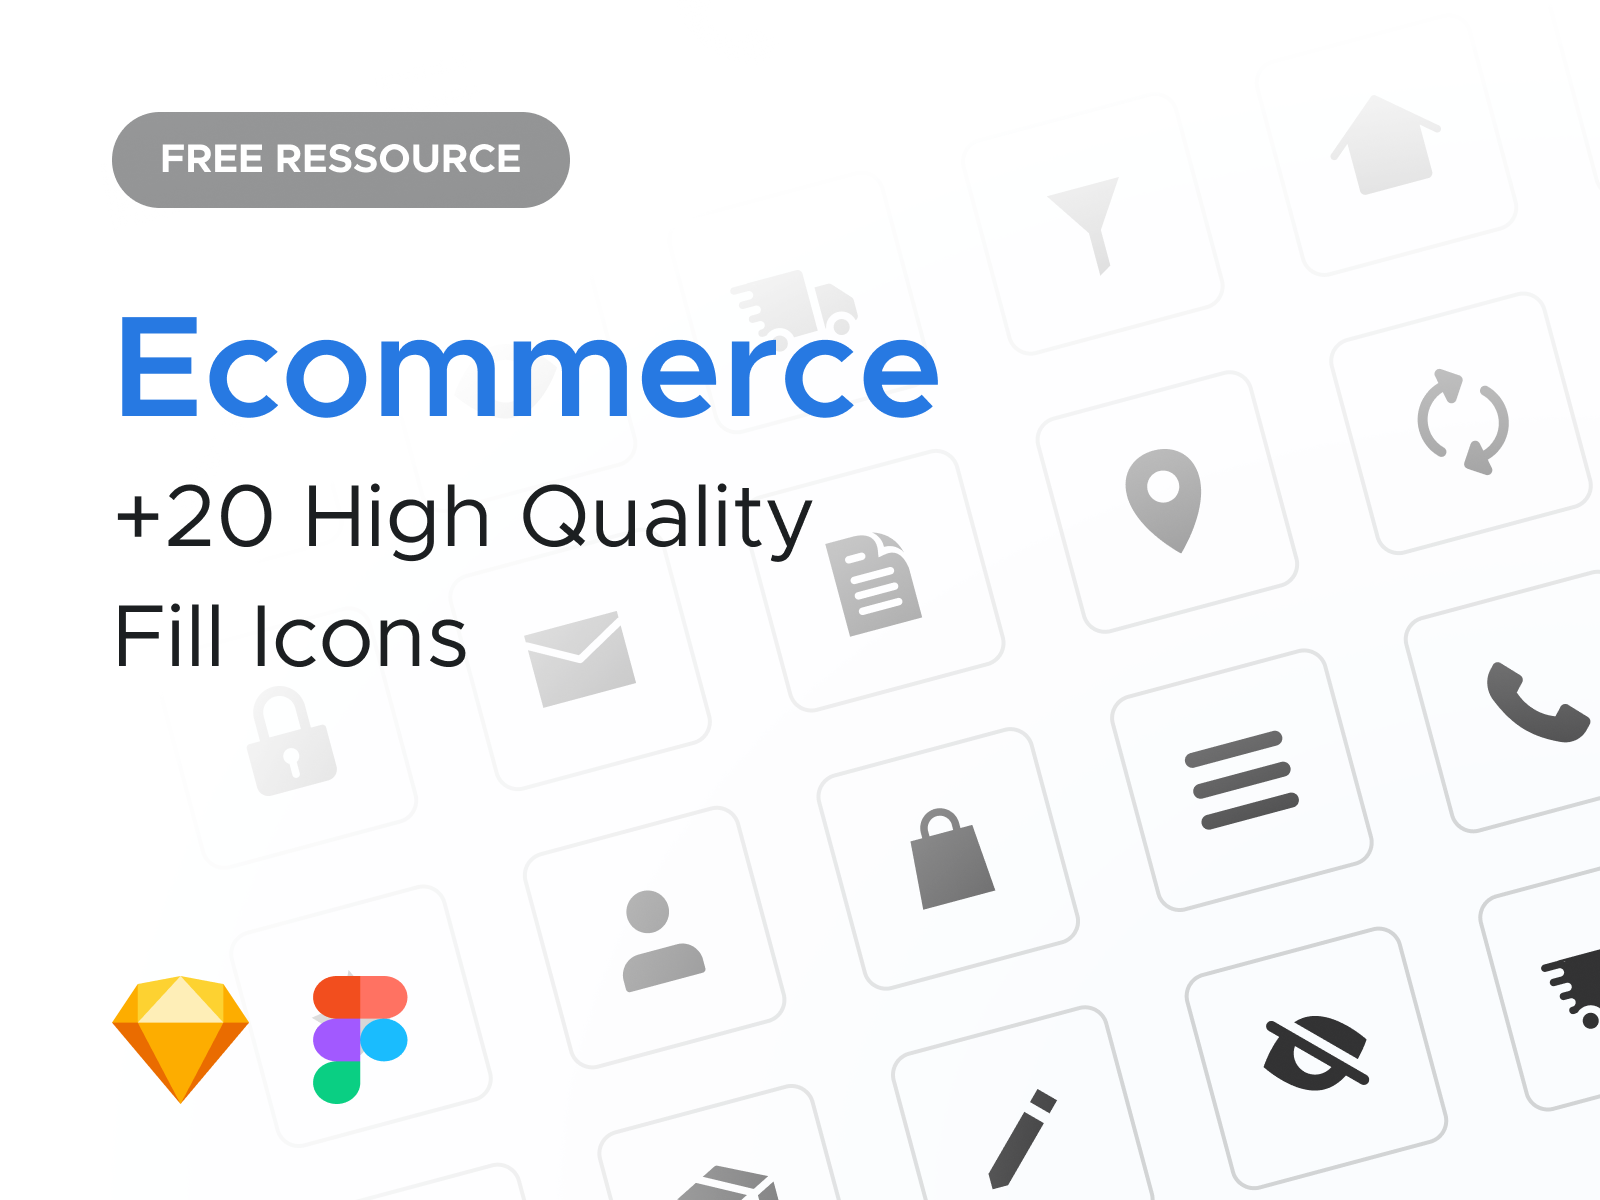 Free Ecommerce Icons agence design dnd ecommerce fill free gumroad icon kit pack ui version